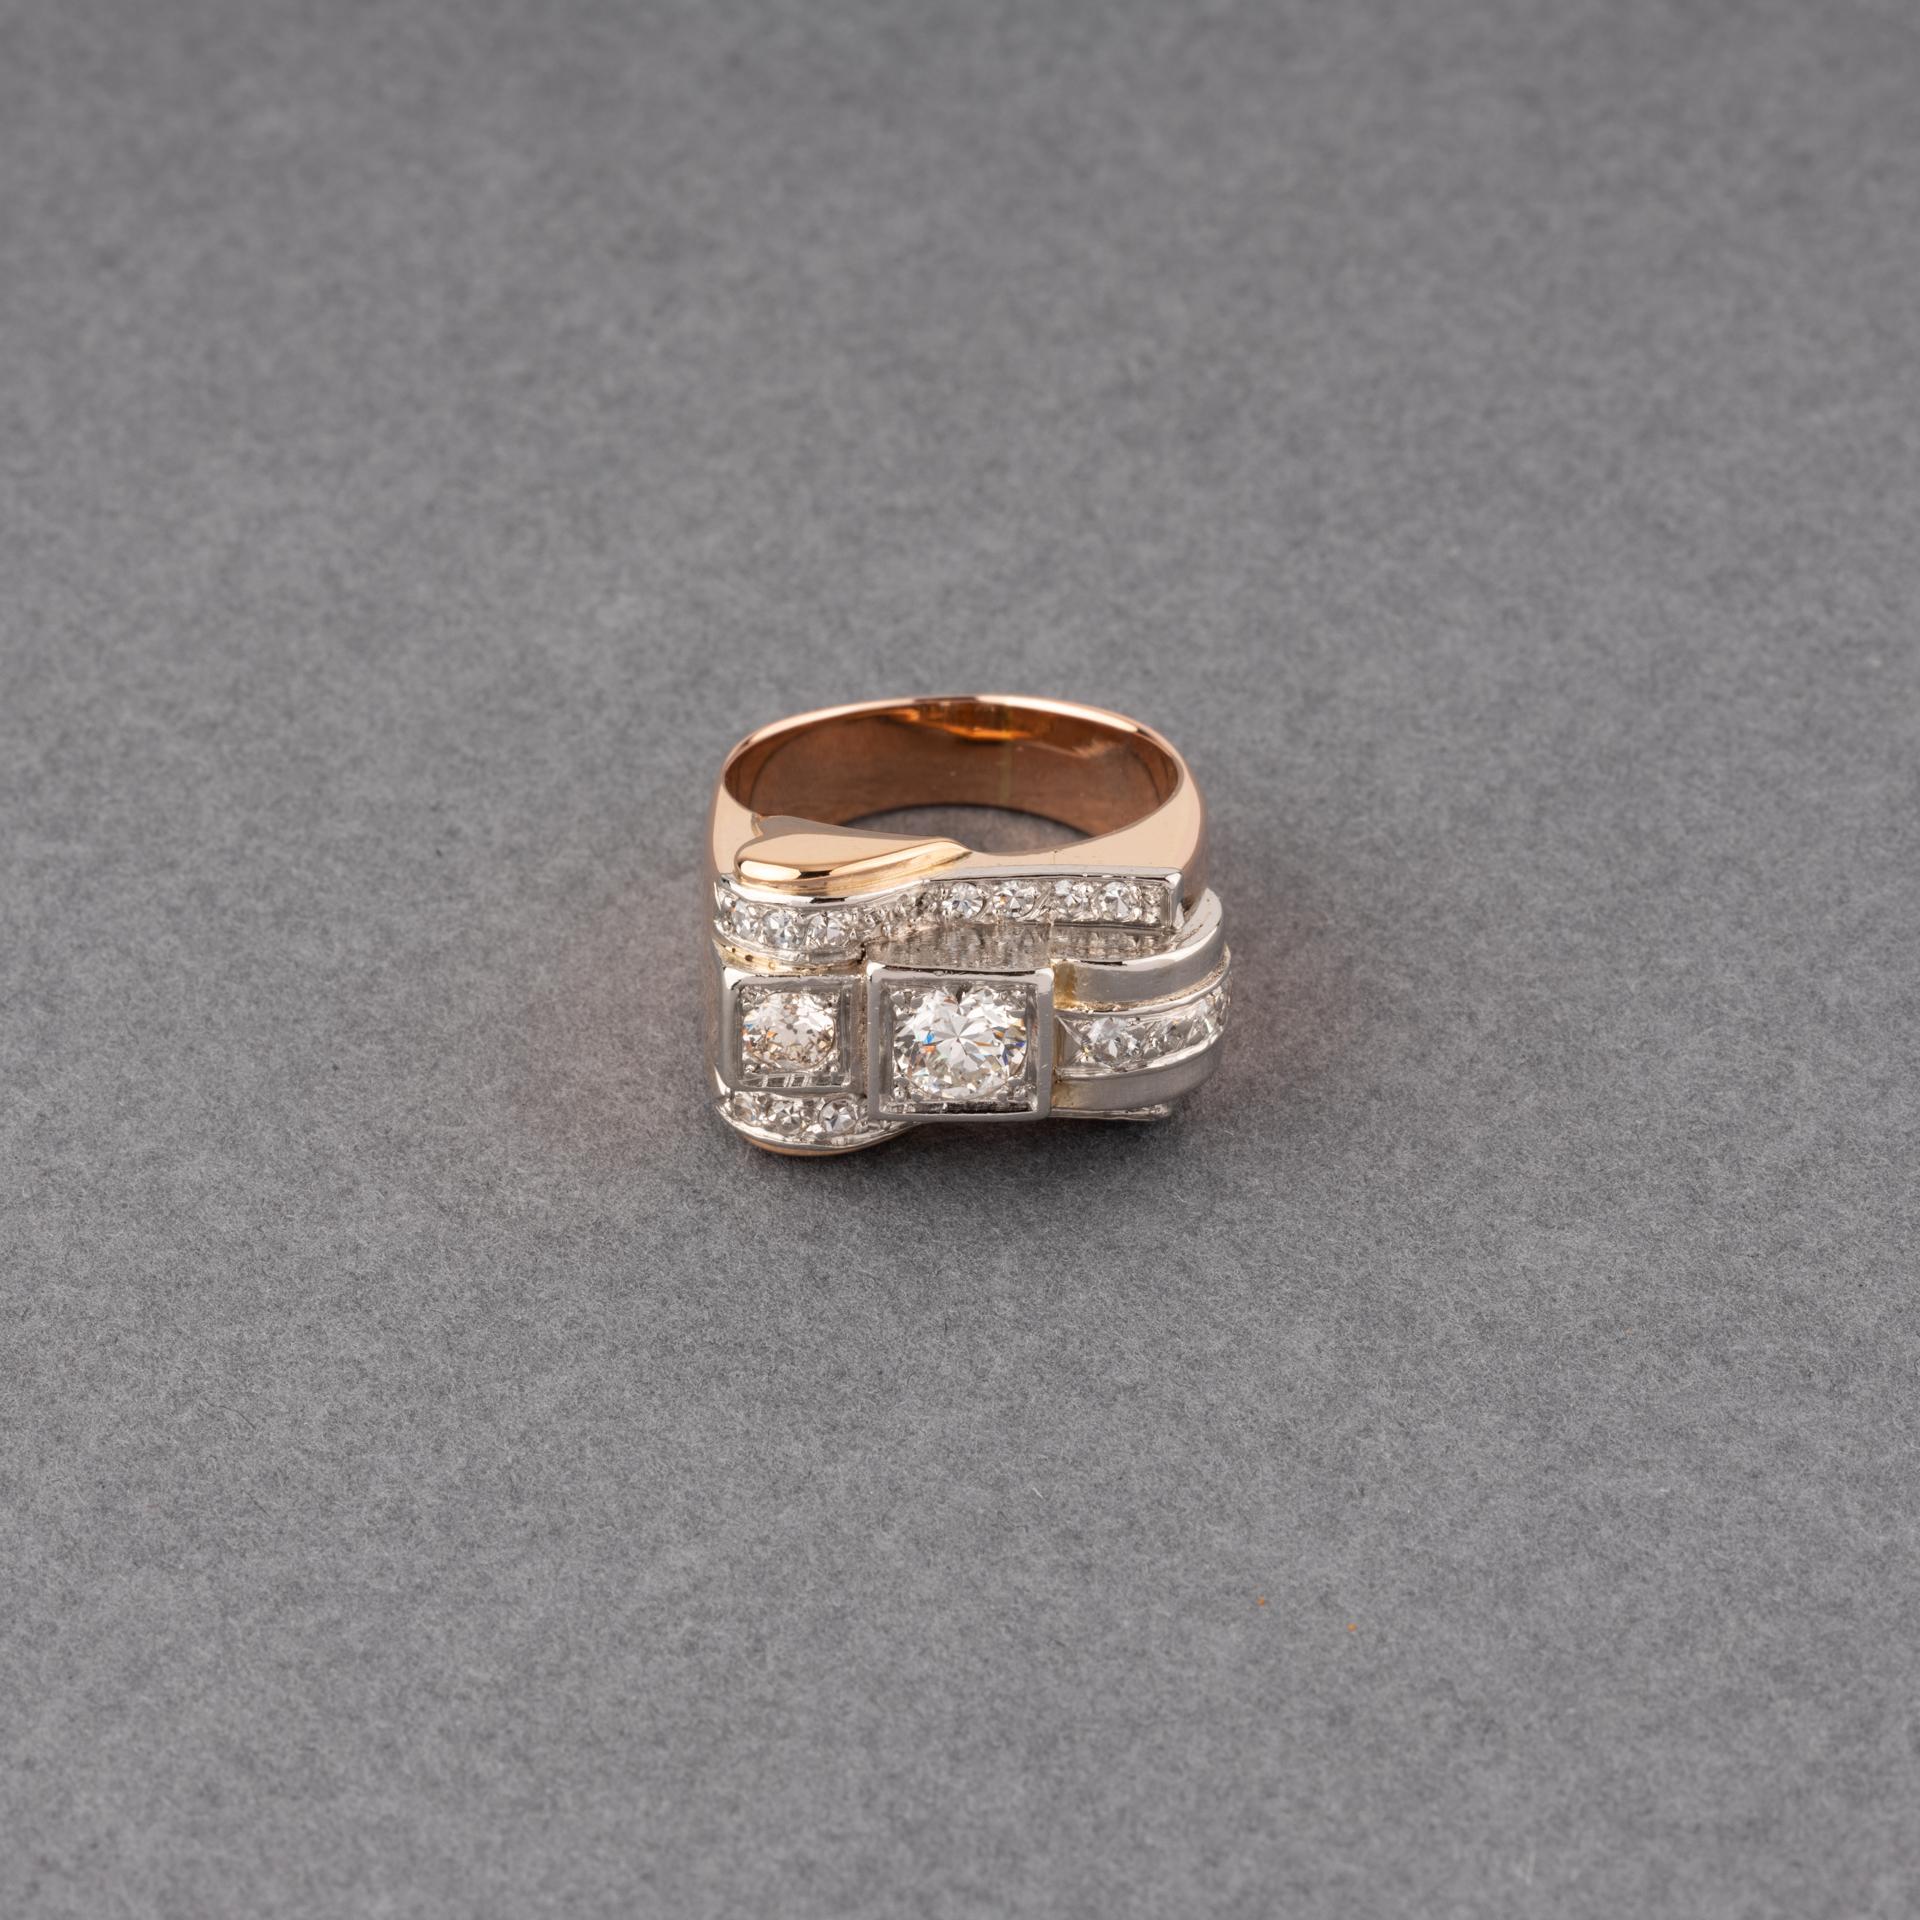 A very lovely ring, made in France circa 1940.
Made in white gold and platinum, hallmarked.
The diamonds are good quality, the bigger one weights approximately 0.60 carats. 1.20 carat total.
Dimension of front part: 22*14mm
Ring size: 55 or 7